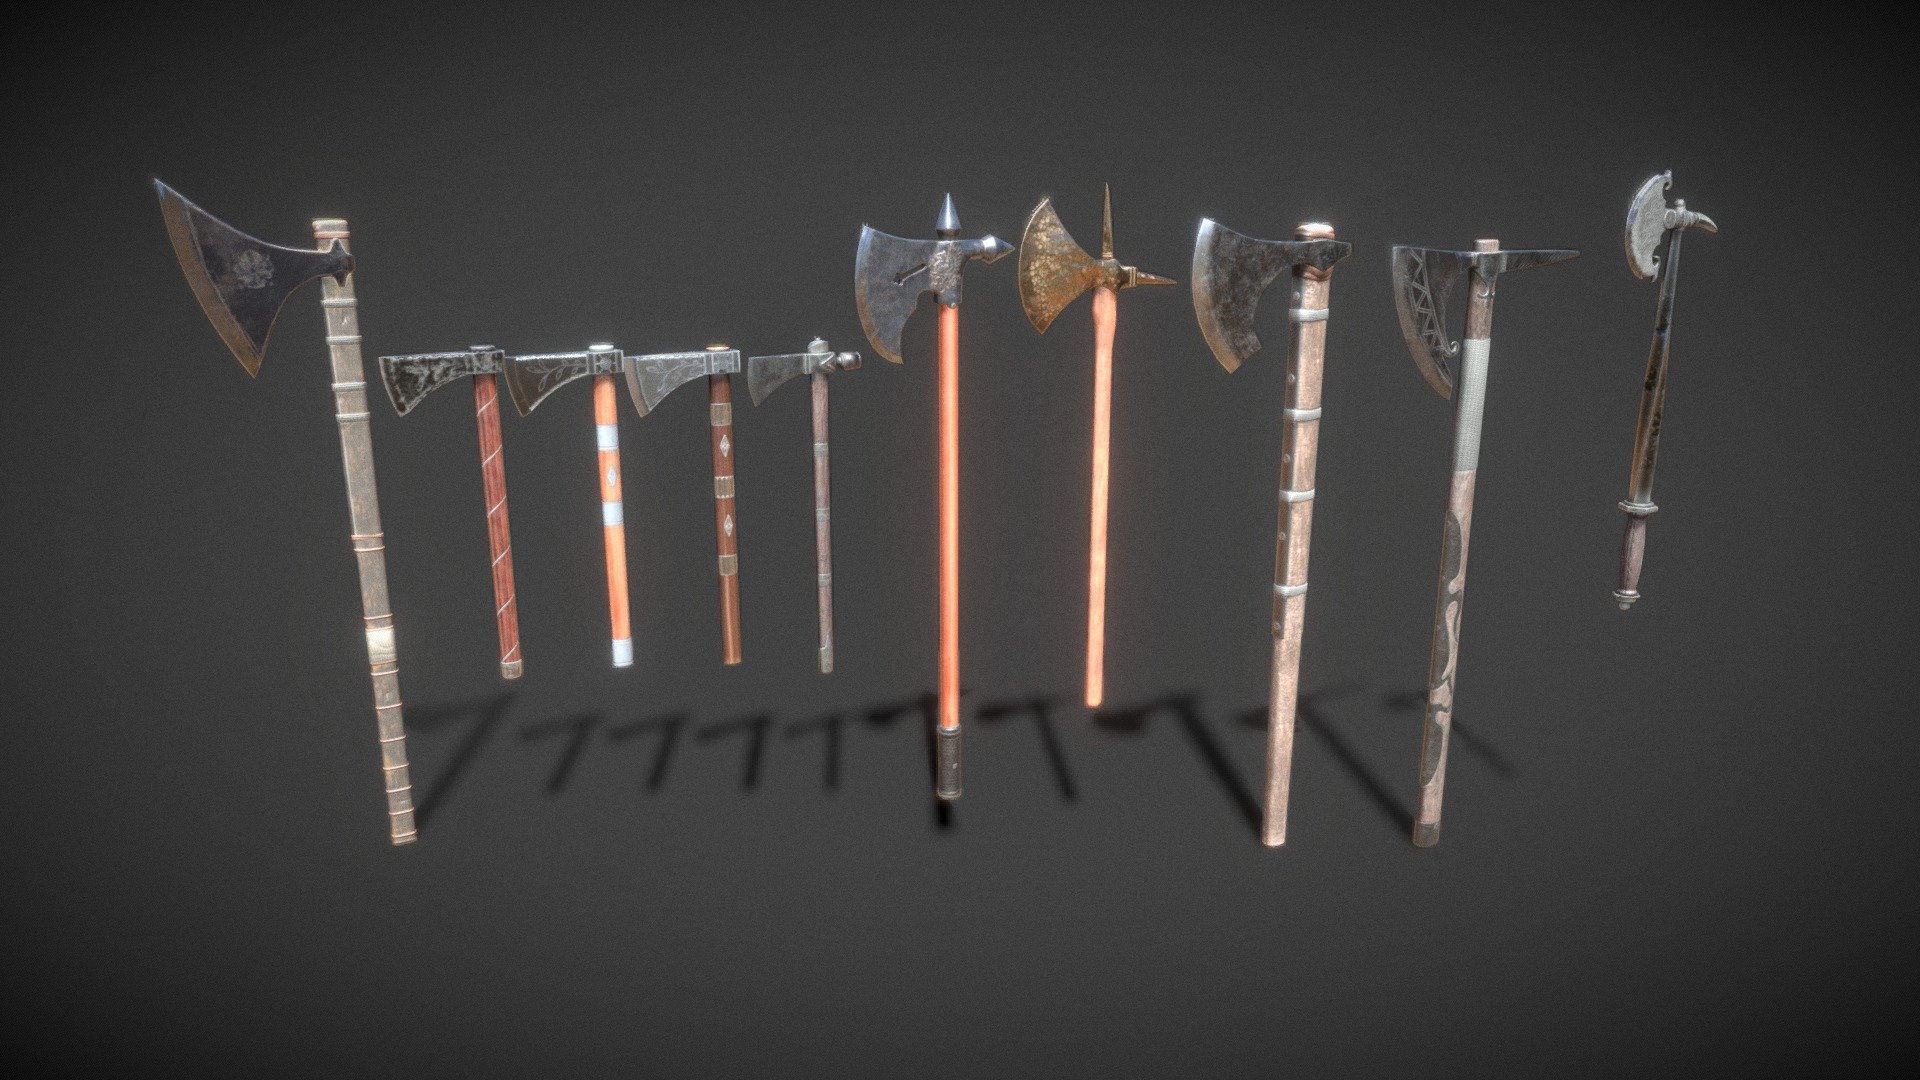 A set of quality Axes. Consists of 10 original items. Each ax has a PBR texture with a resolution of 2048x2048. Total polygons (triangles) 15544, vertices 7828

Ax 01 - 3048

Ax 02 - 628

Ax 03 - 618

Ax 04 - 568

Ax 05 - 1466

Ax 06 - 1434

Ax 07 - 1112

Ax 08 - 1548

Ax 09 - 1658

Ax 10 - 3464

The archive contains additional materials: FBX, OBJ, Blend files. 2k textures - PNG, JPG and PNG (Unity Metallic Smoothness)

Archives with textures contain:

Textures JPG - Albedo, AO, Metalic, Normal, Roughness.

Textures PNG - base color, metalic, normal, roughness

Texturing Unity (Metallic Smoothness) - AlbedoTransparency, MetallicSmoothness, Normal - Medieval Ax Set 02 - 3D model by zilbeerman 3d model